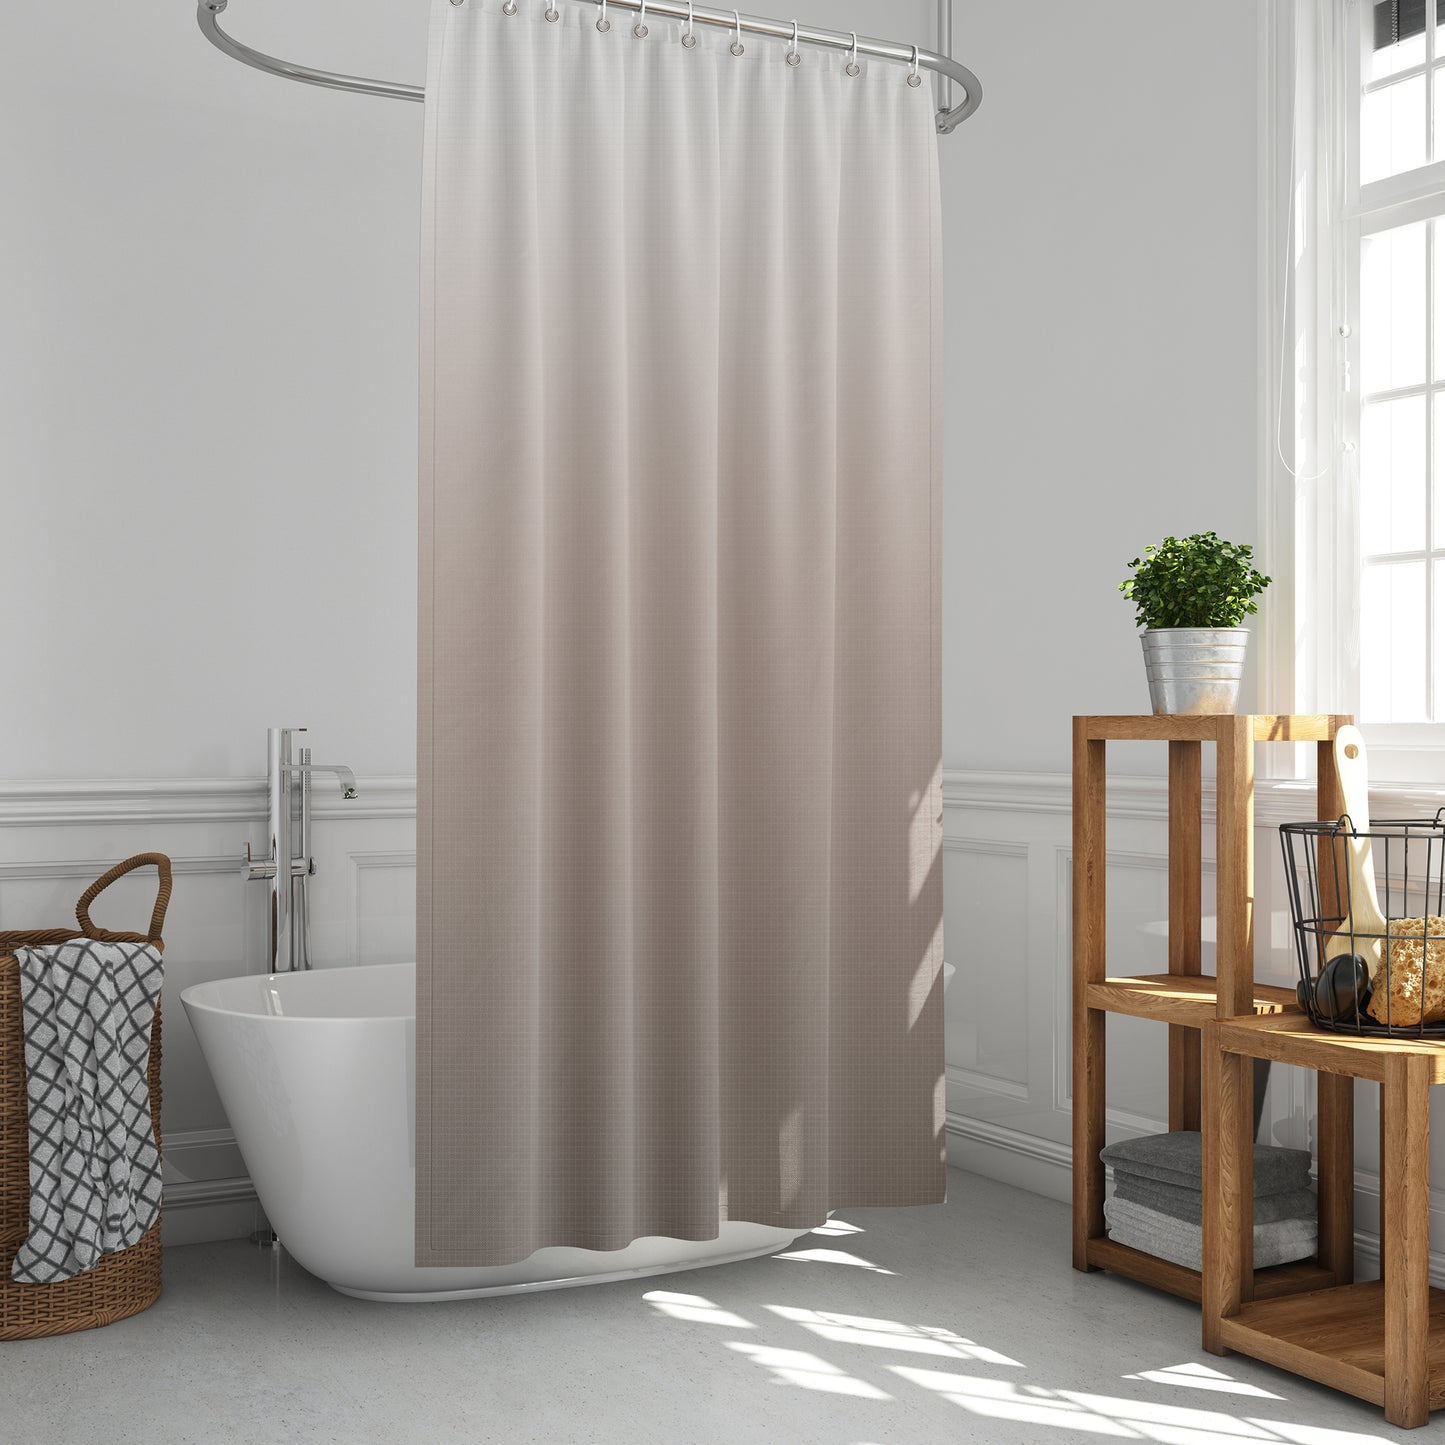 extra long shower curtain